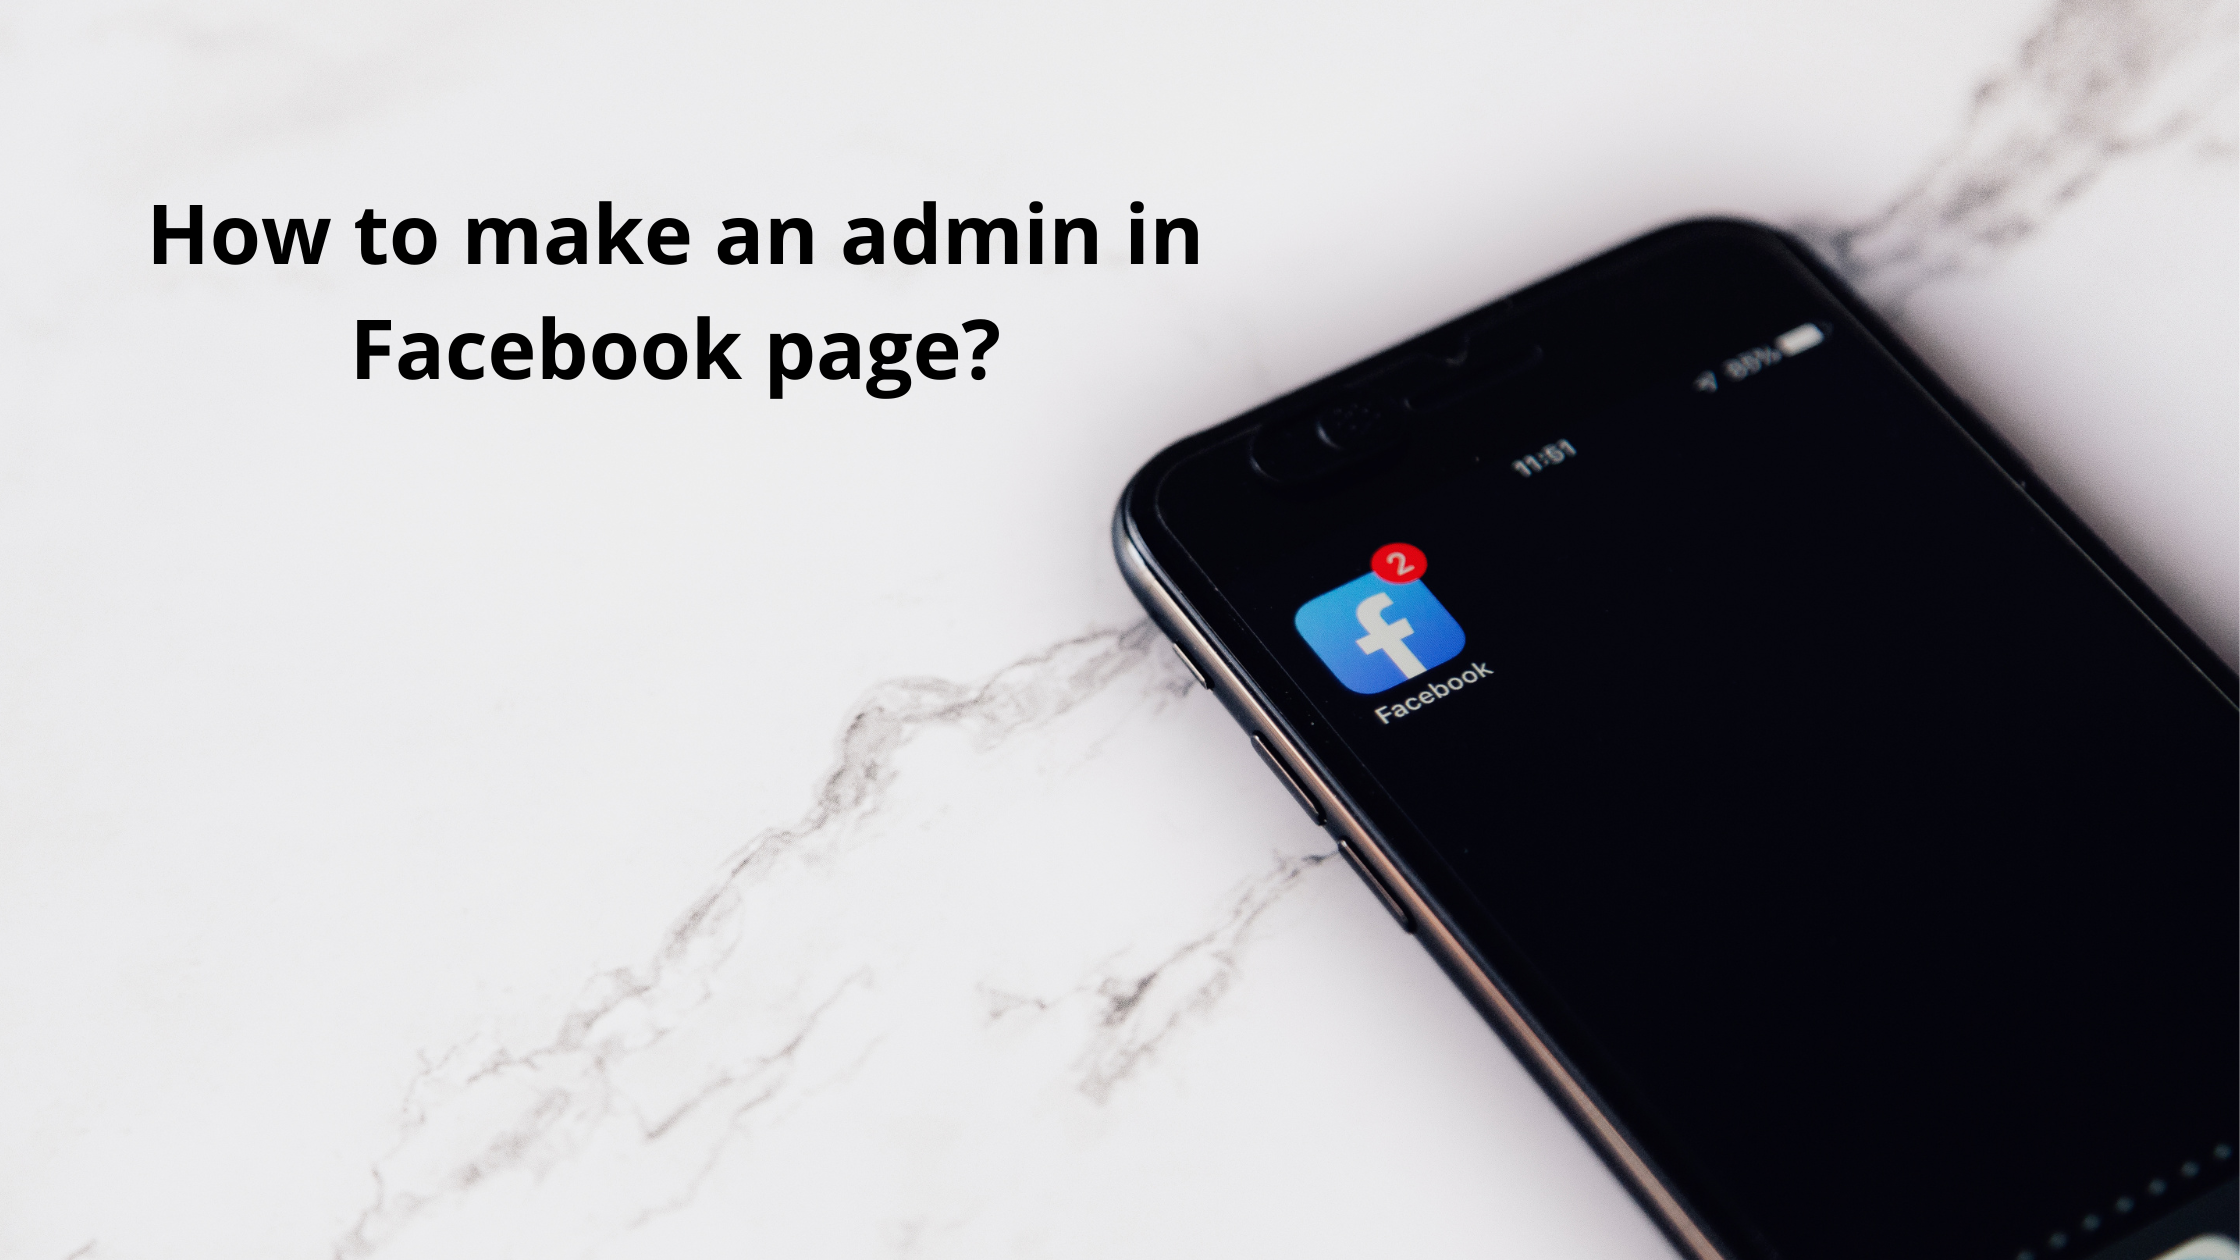 How to make an admin in Facebook page